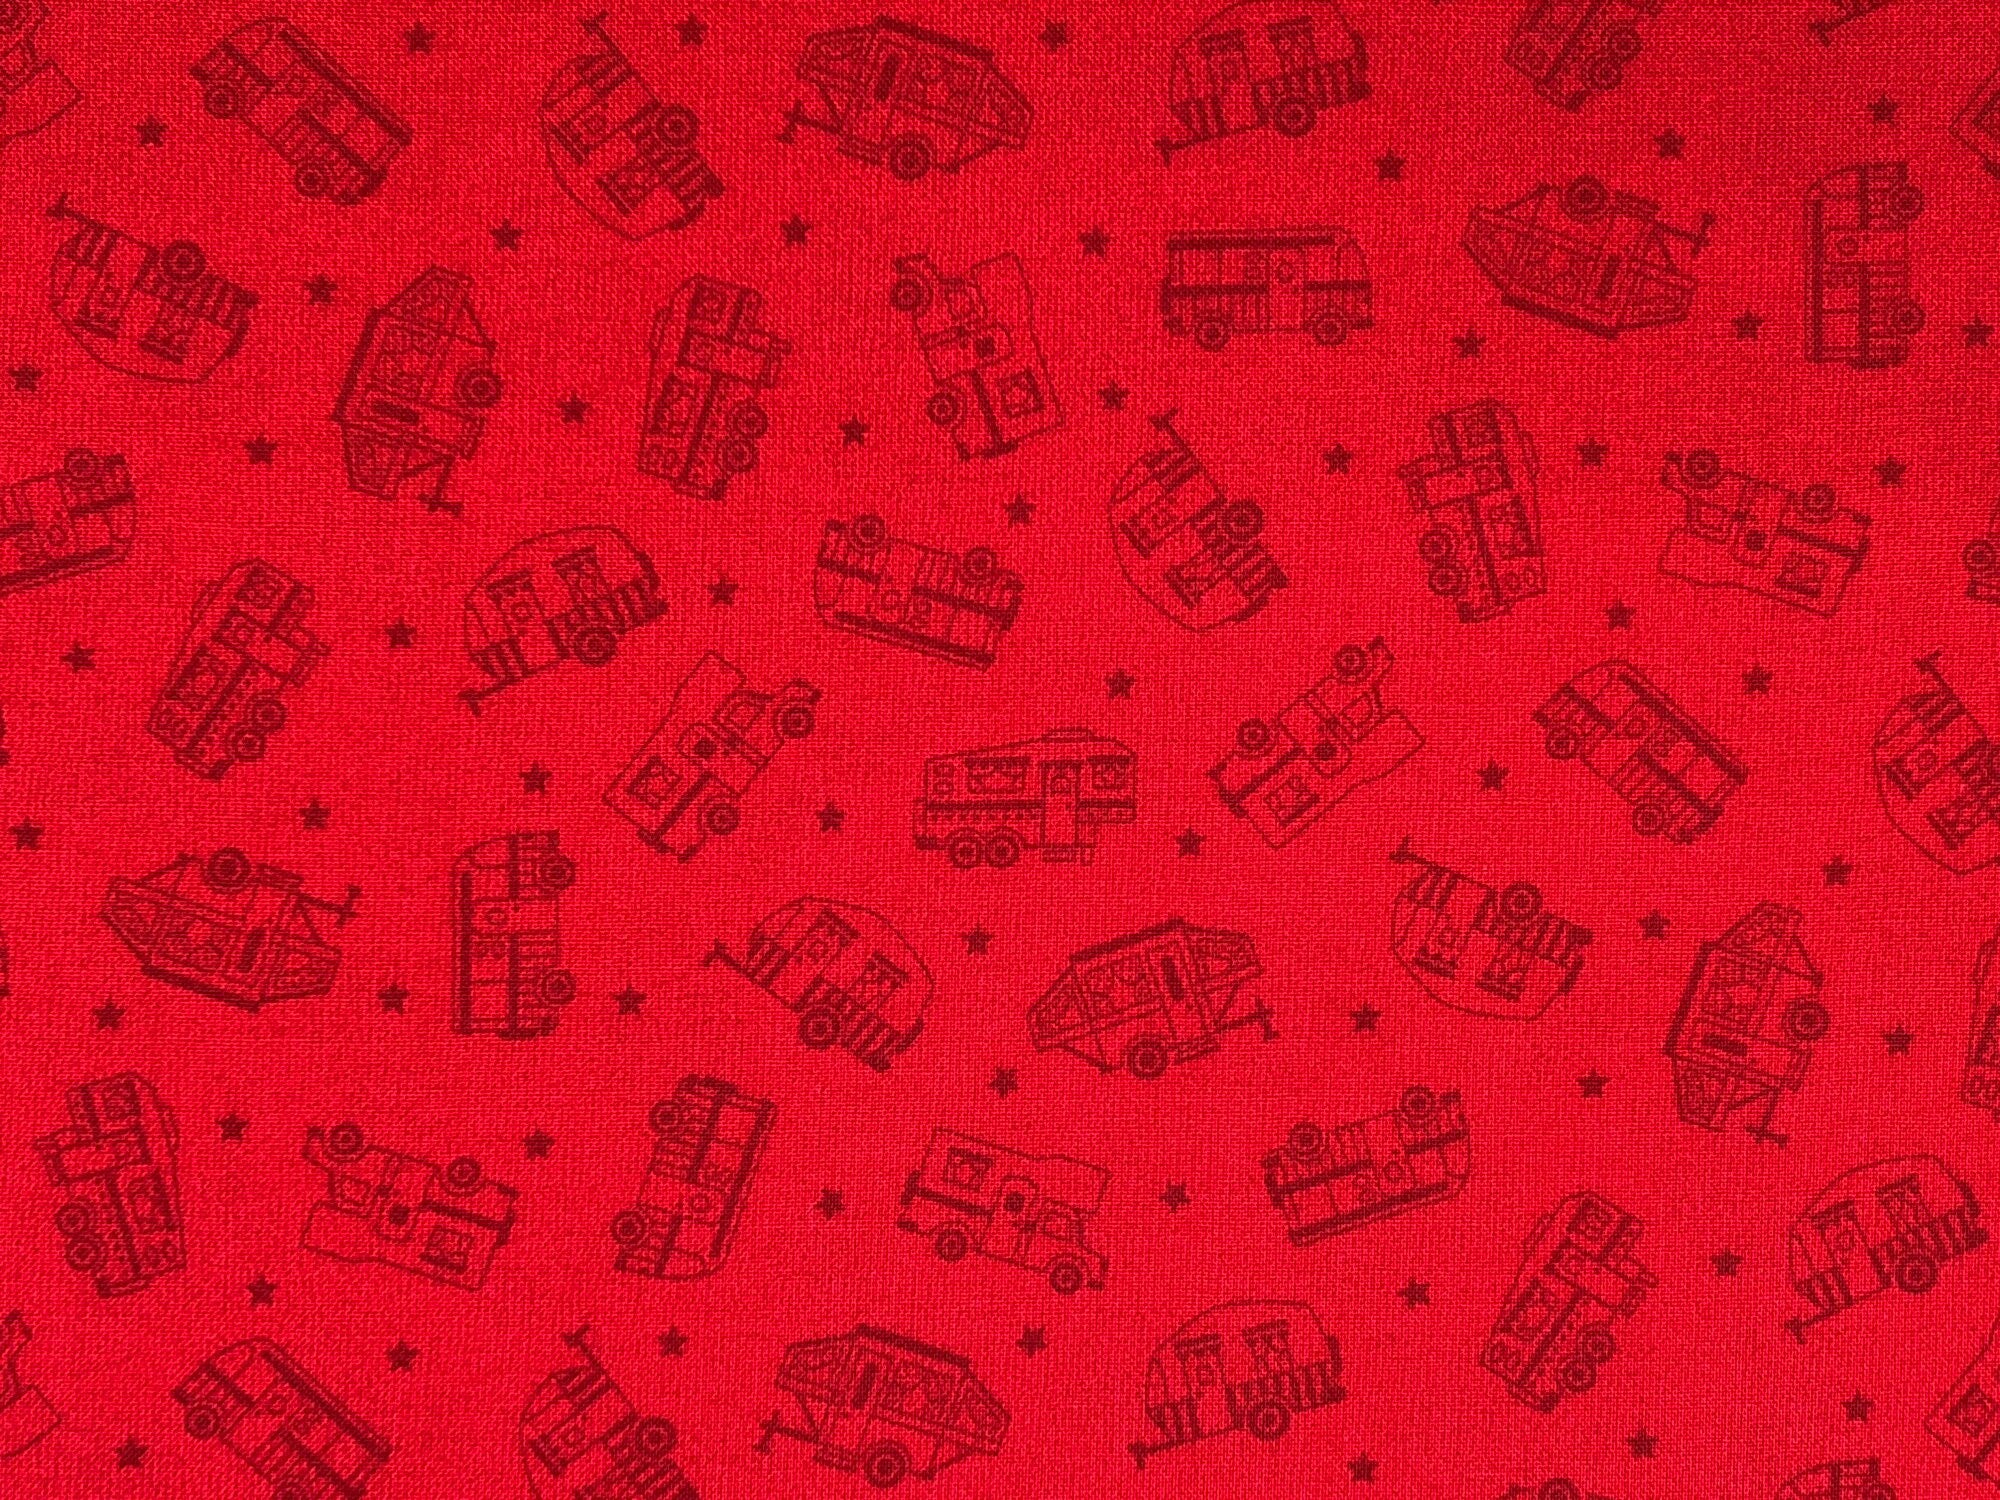 This fabric is called tone on tone campers and is covered with travel trailers, campers on trucks, 5th wheels pop up tents, and 5th wheels. This fabric is part of the Roaming Holiday Collection by Pam Bocko